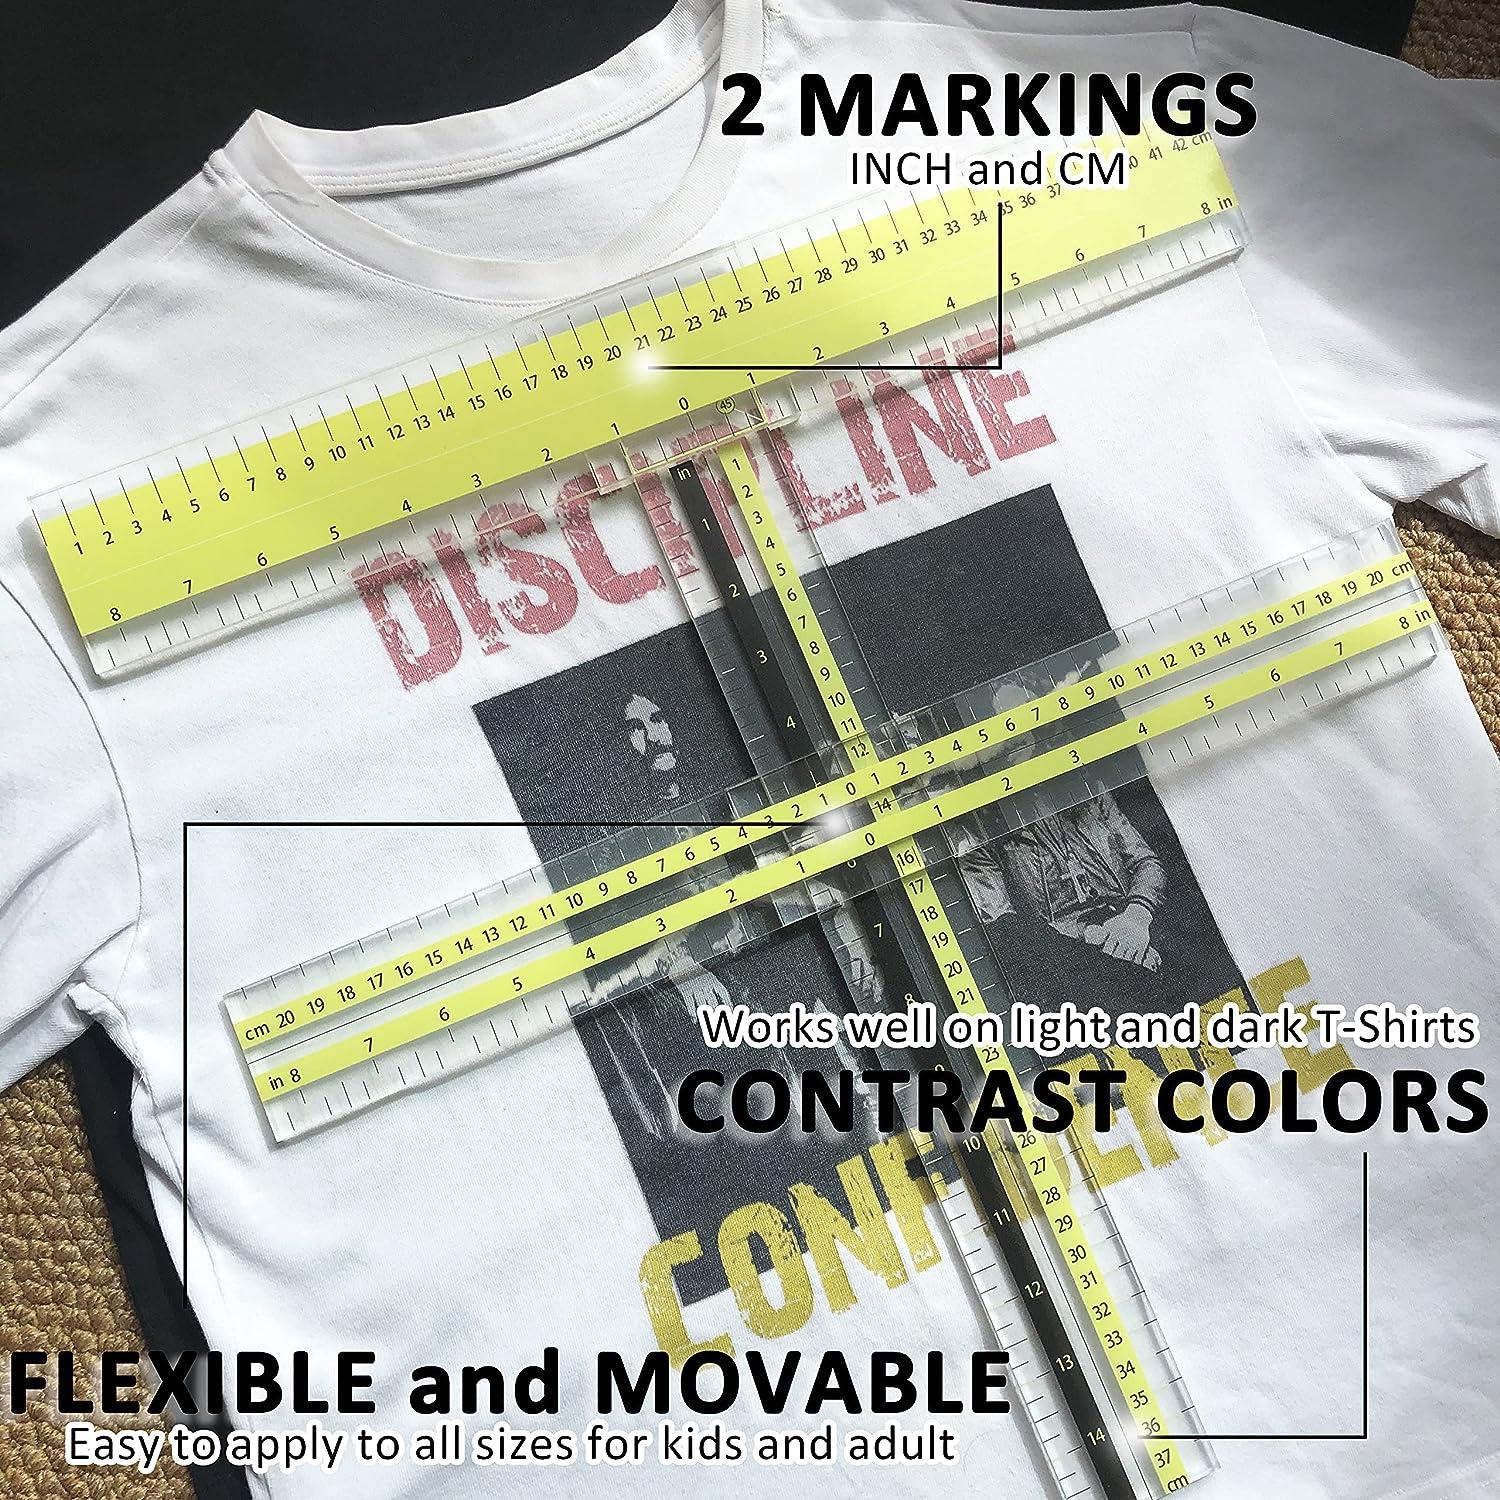 ROSALIX Tshirt Ruler Guide for Vinyl Alignment 12 peices, Color